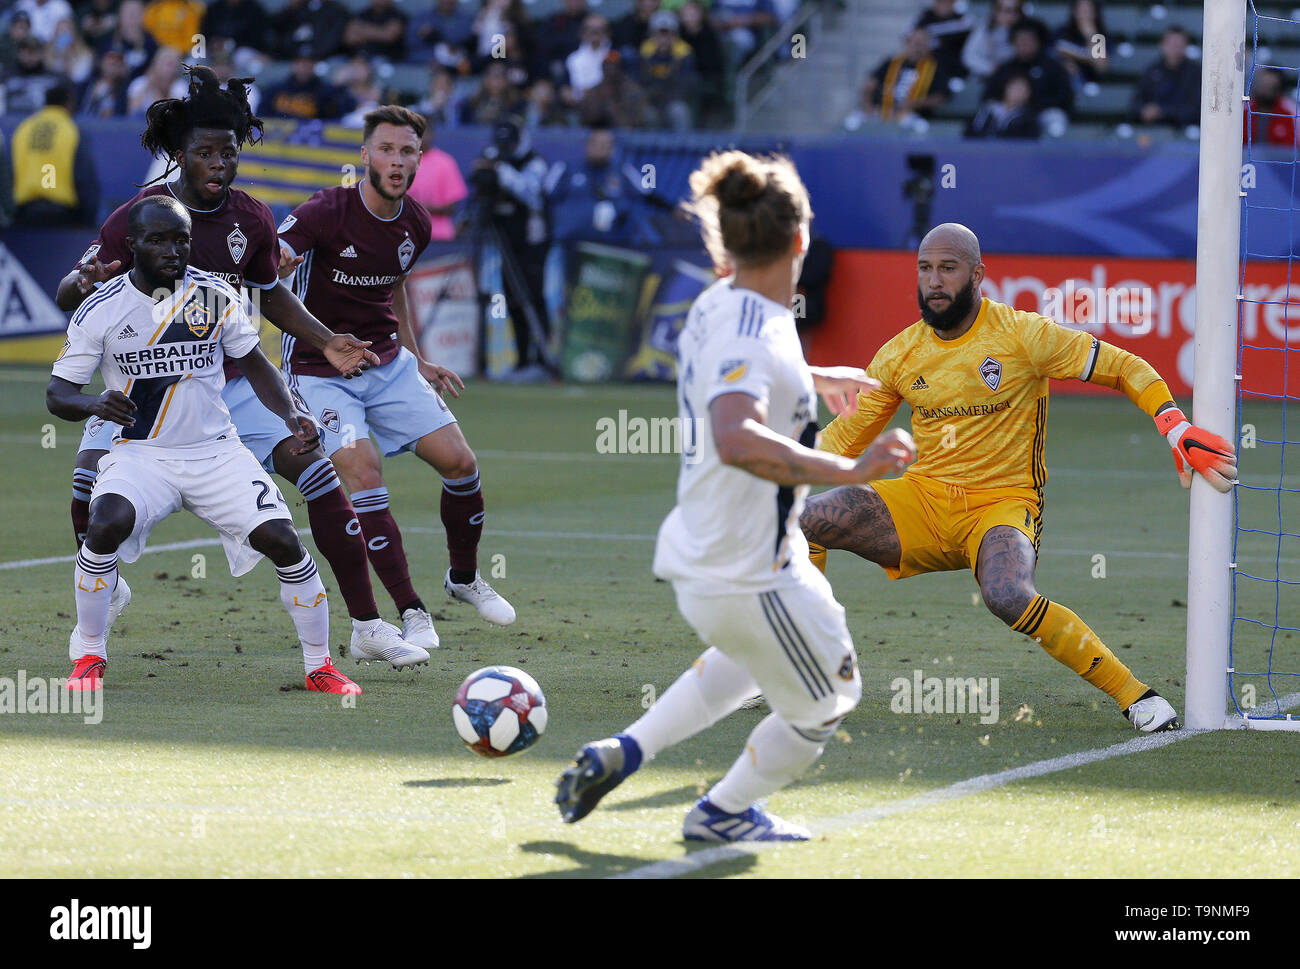 Los Angeles, California, USA. 19th May, 2019. Colorado Rapids goalkeeper Tim Howard (1) protects the net against LA Galaxy midfielder Emmanuel Boateng (24) of Ghana, and LA Galaxy defender Rolf Feltscher (25) of Switzerland, during the 2019 Major League Soccer (MLS) match between LA Galaxy and Colorado Rapids in Carson, California, May 19, 2019. Credit: Ringo Chiu/ZUMA Wire/Alamy Live News Stock Photo